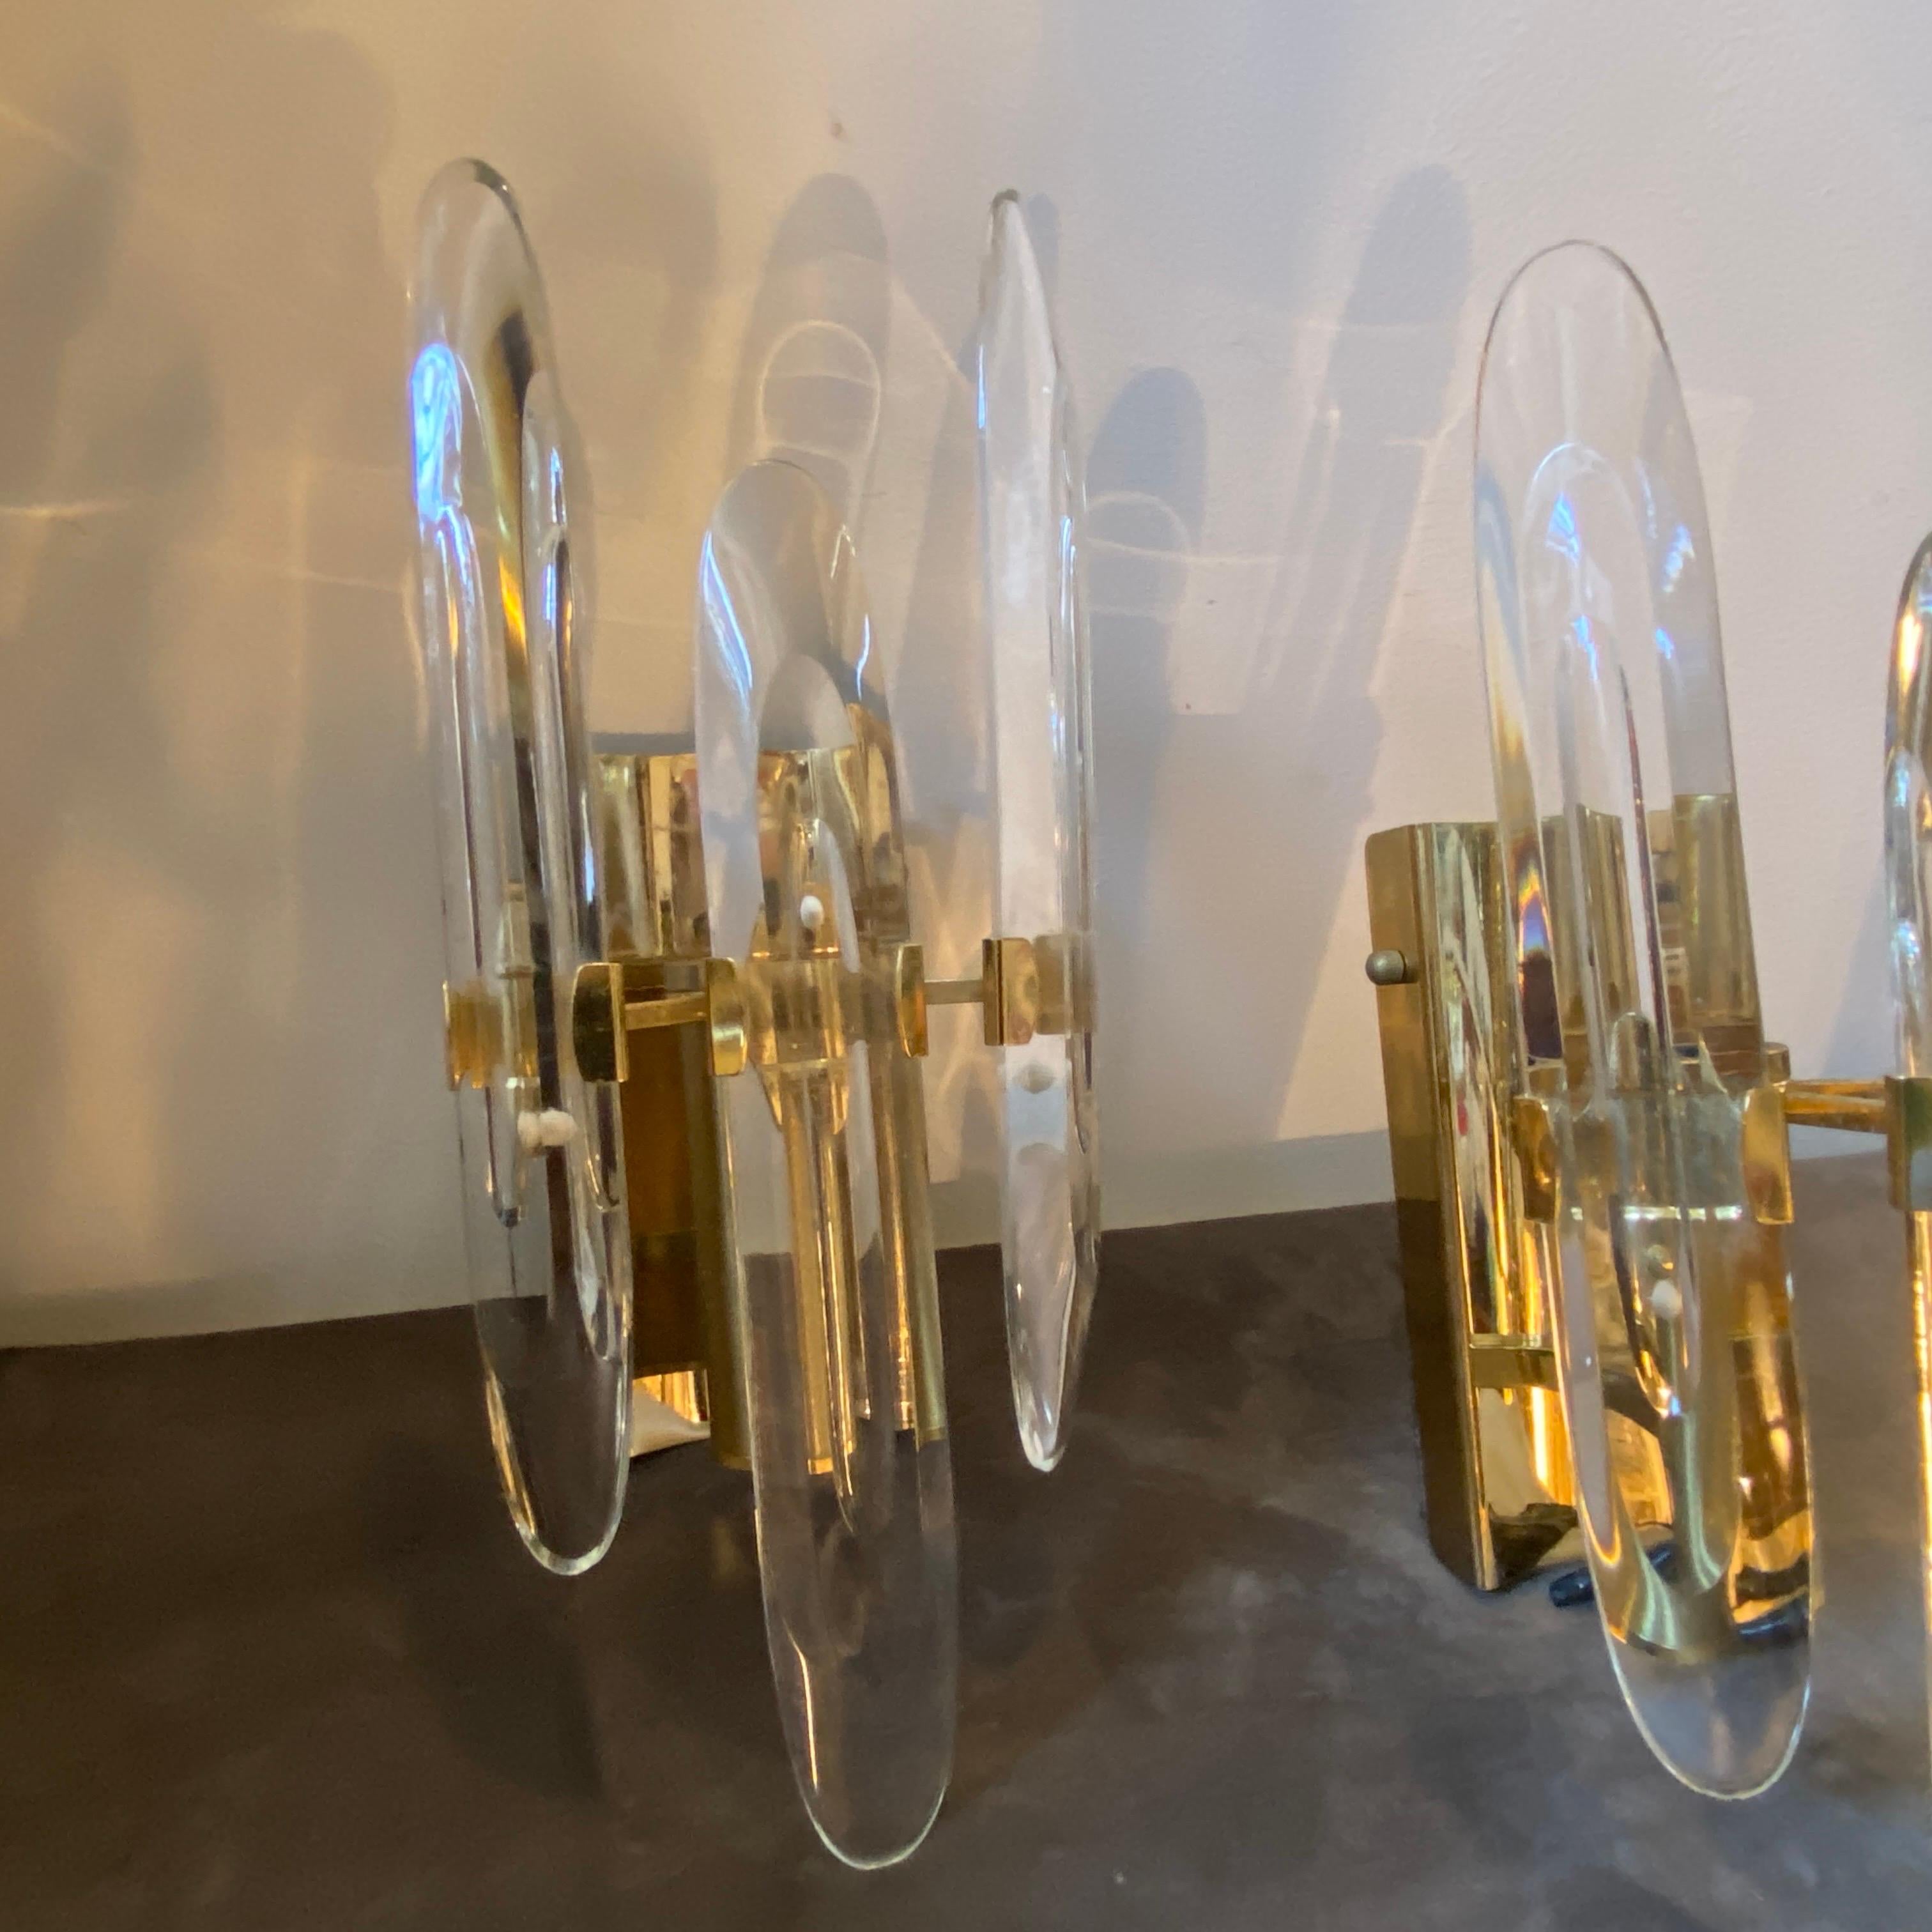 A pair of Mid-Century Modern brass and optical glass wall sconces designed by Gaetano Sciolari and manufactured in Italy by Sciolari Lighting. they work both 110-240 volts and need regular e14 bulbs. The optical glasses have the function of